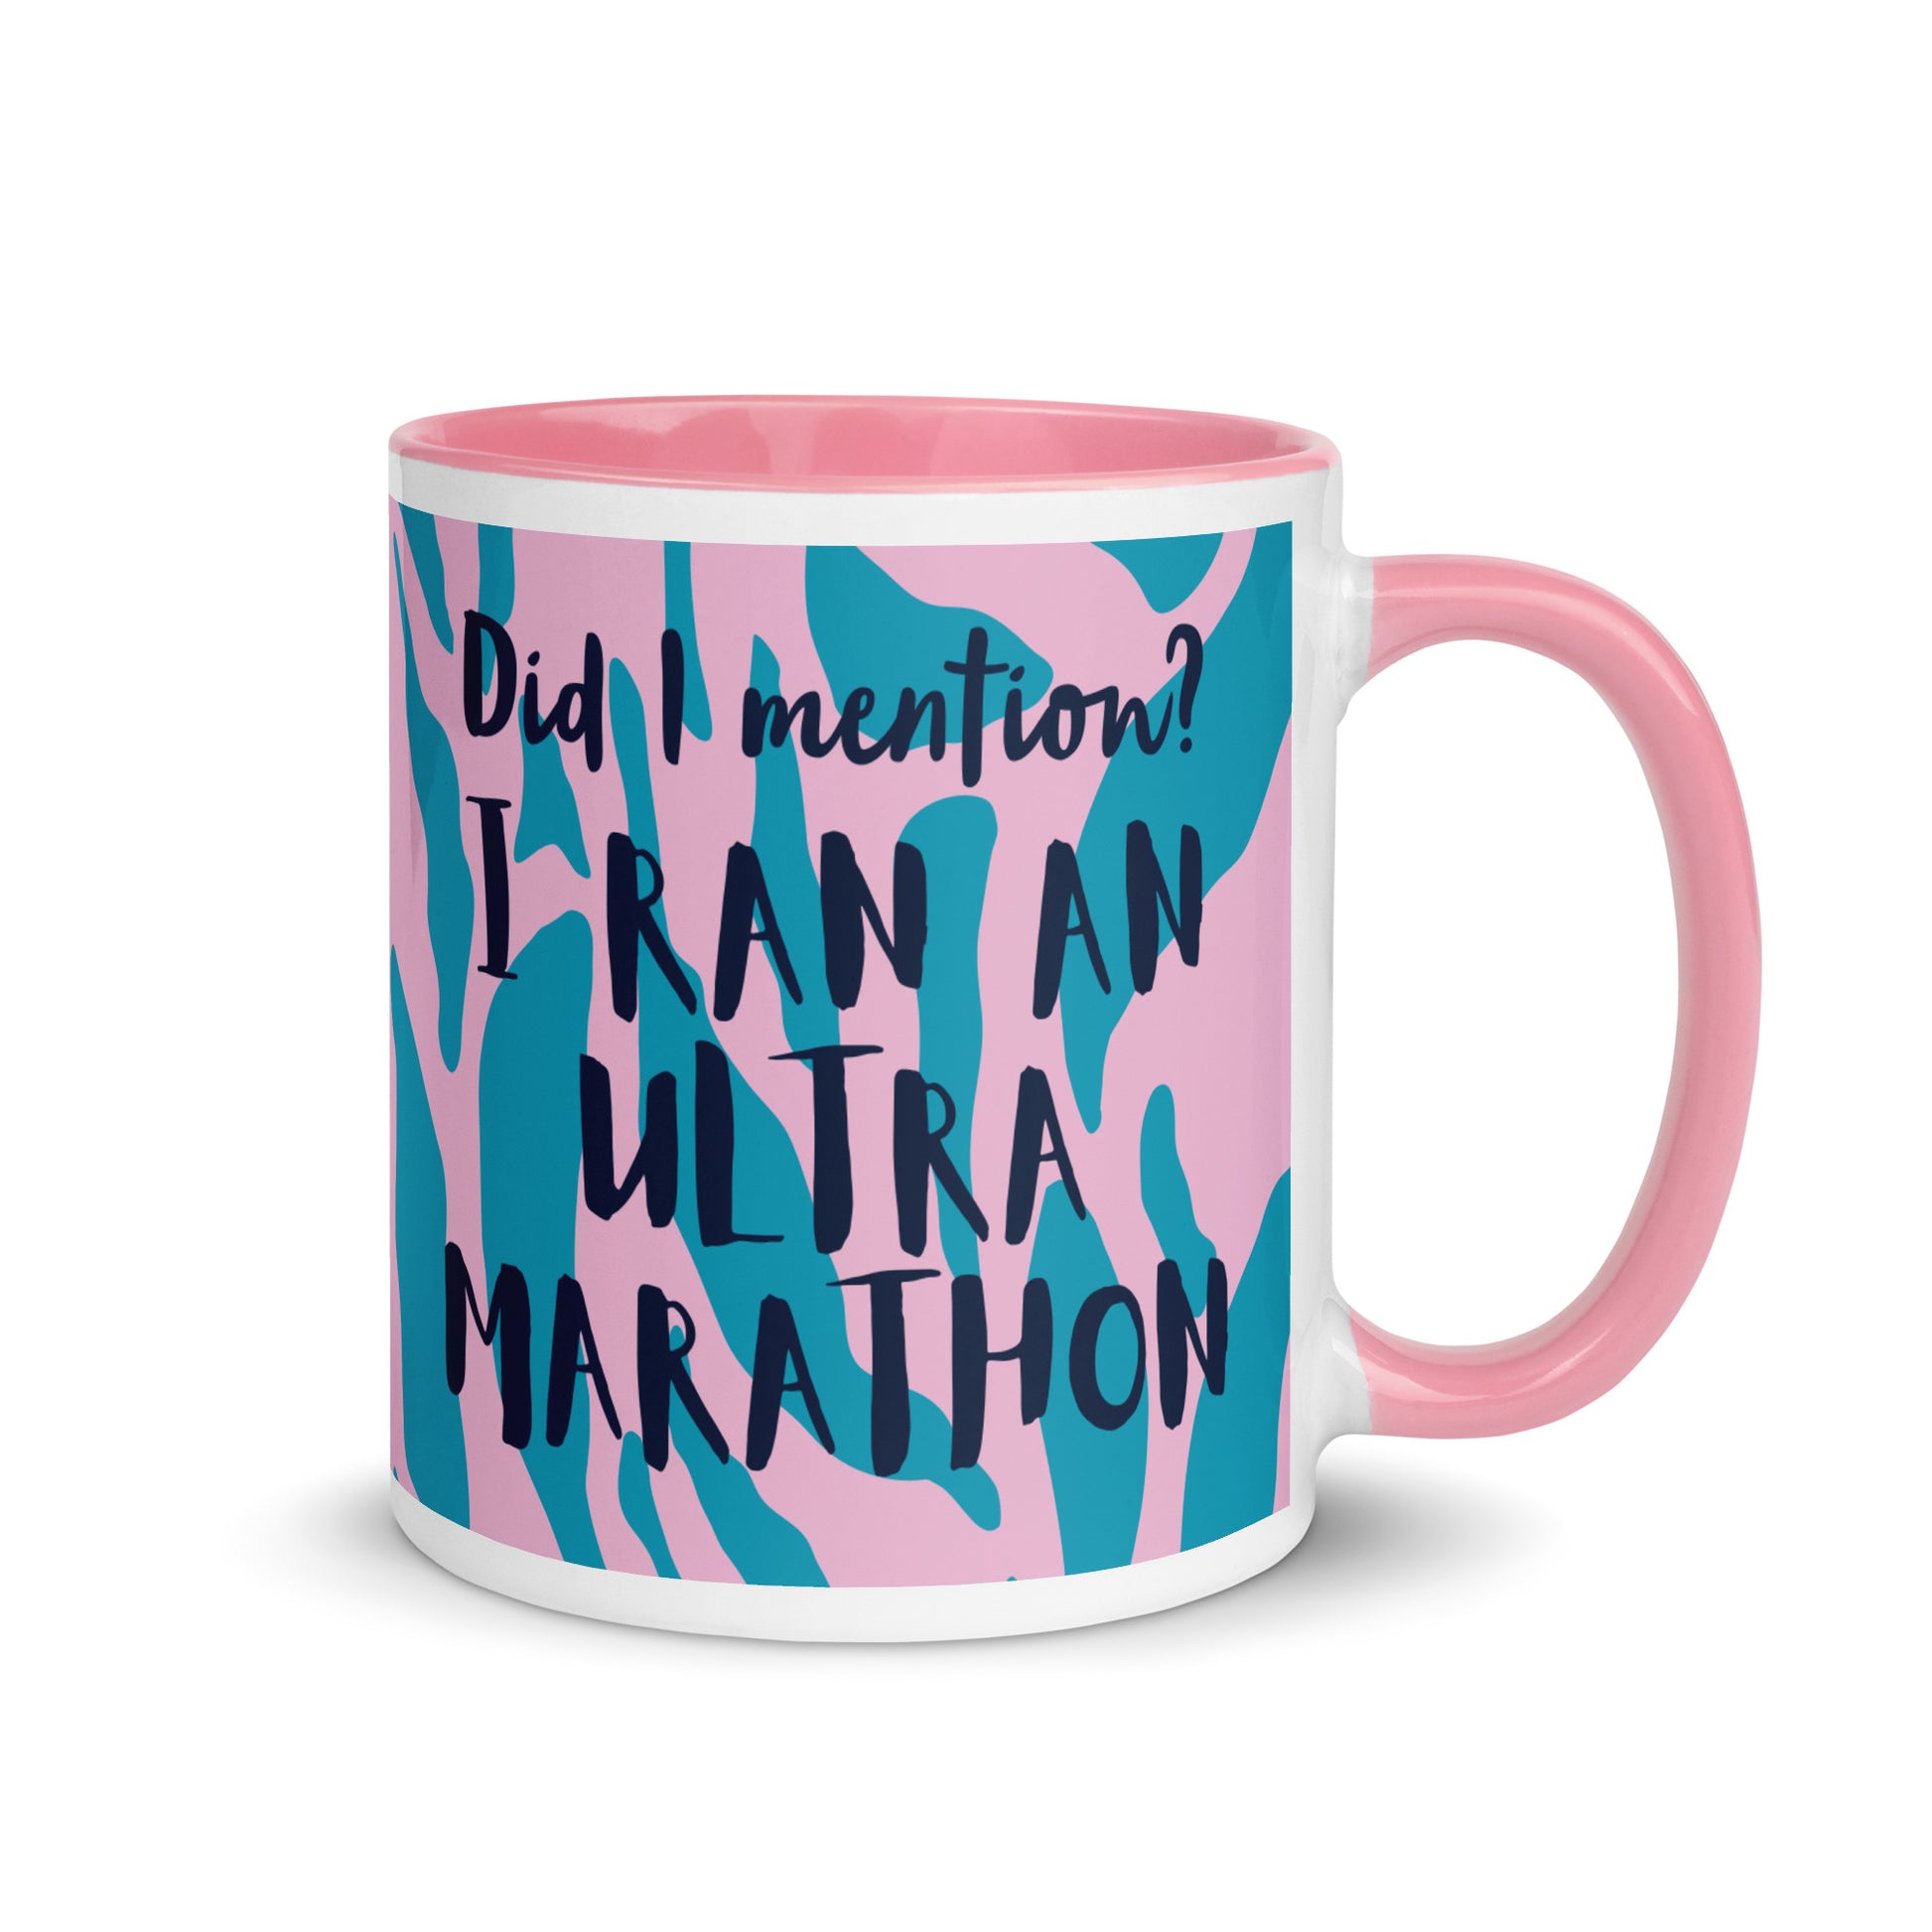 coffee mug with pink handle and rim, with the words did i mention? i ran an ultra marathon. a gift for people who have completed an ultra marathon